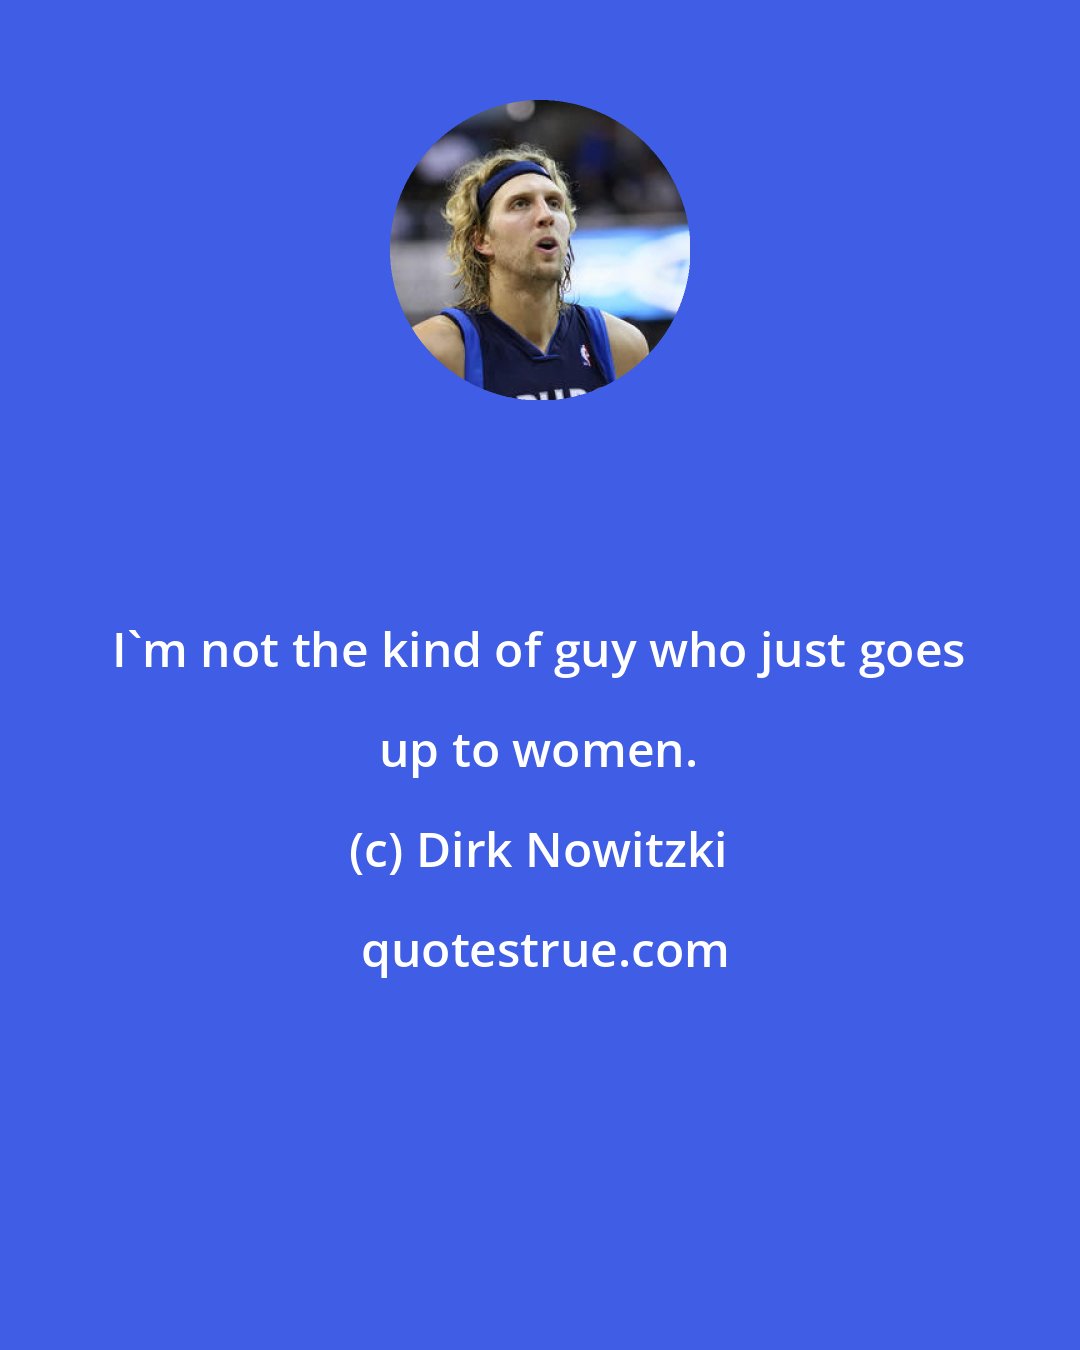 Dirk Nowitzki: I'm not the kind of guy who just goes up to women.